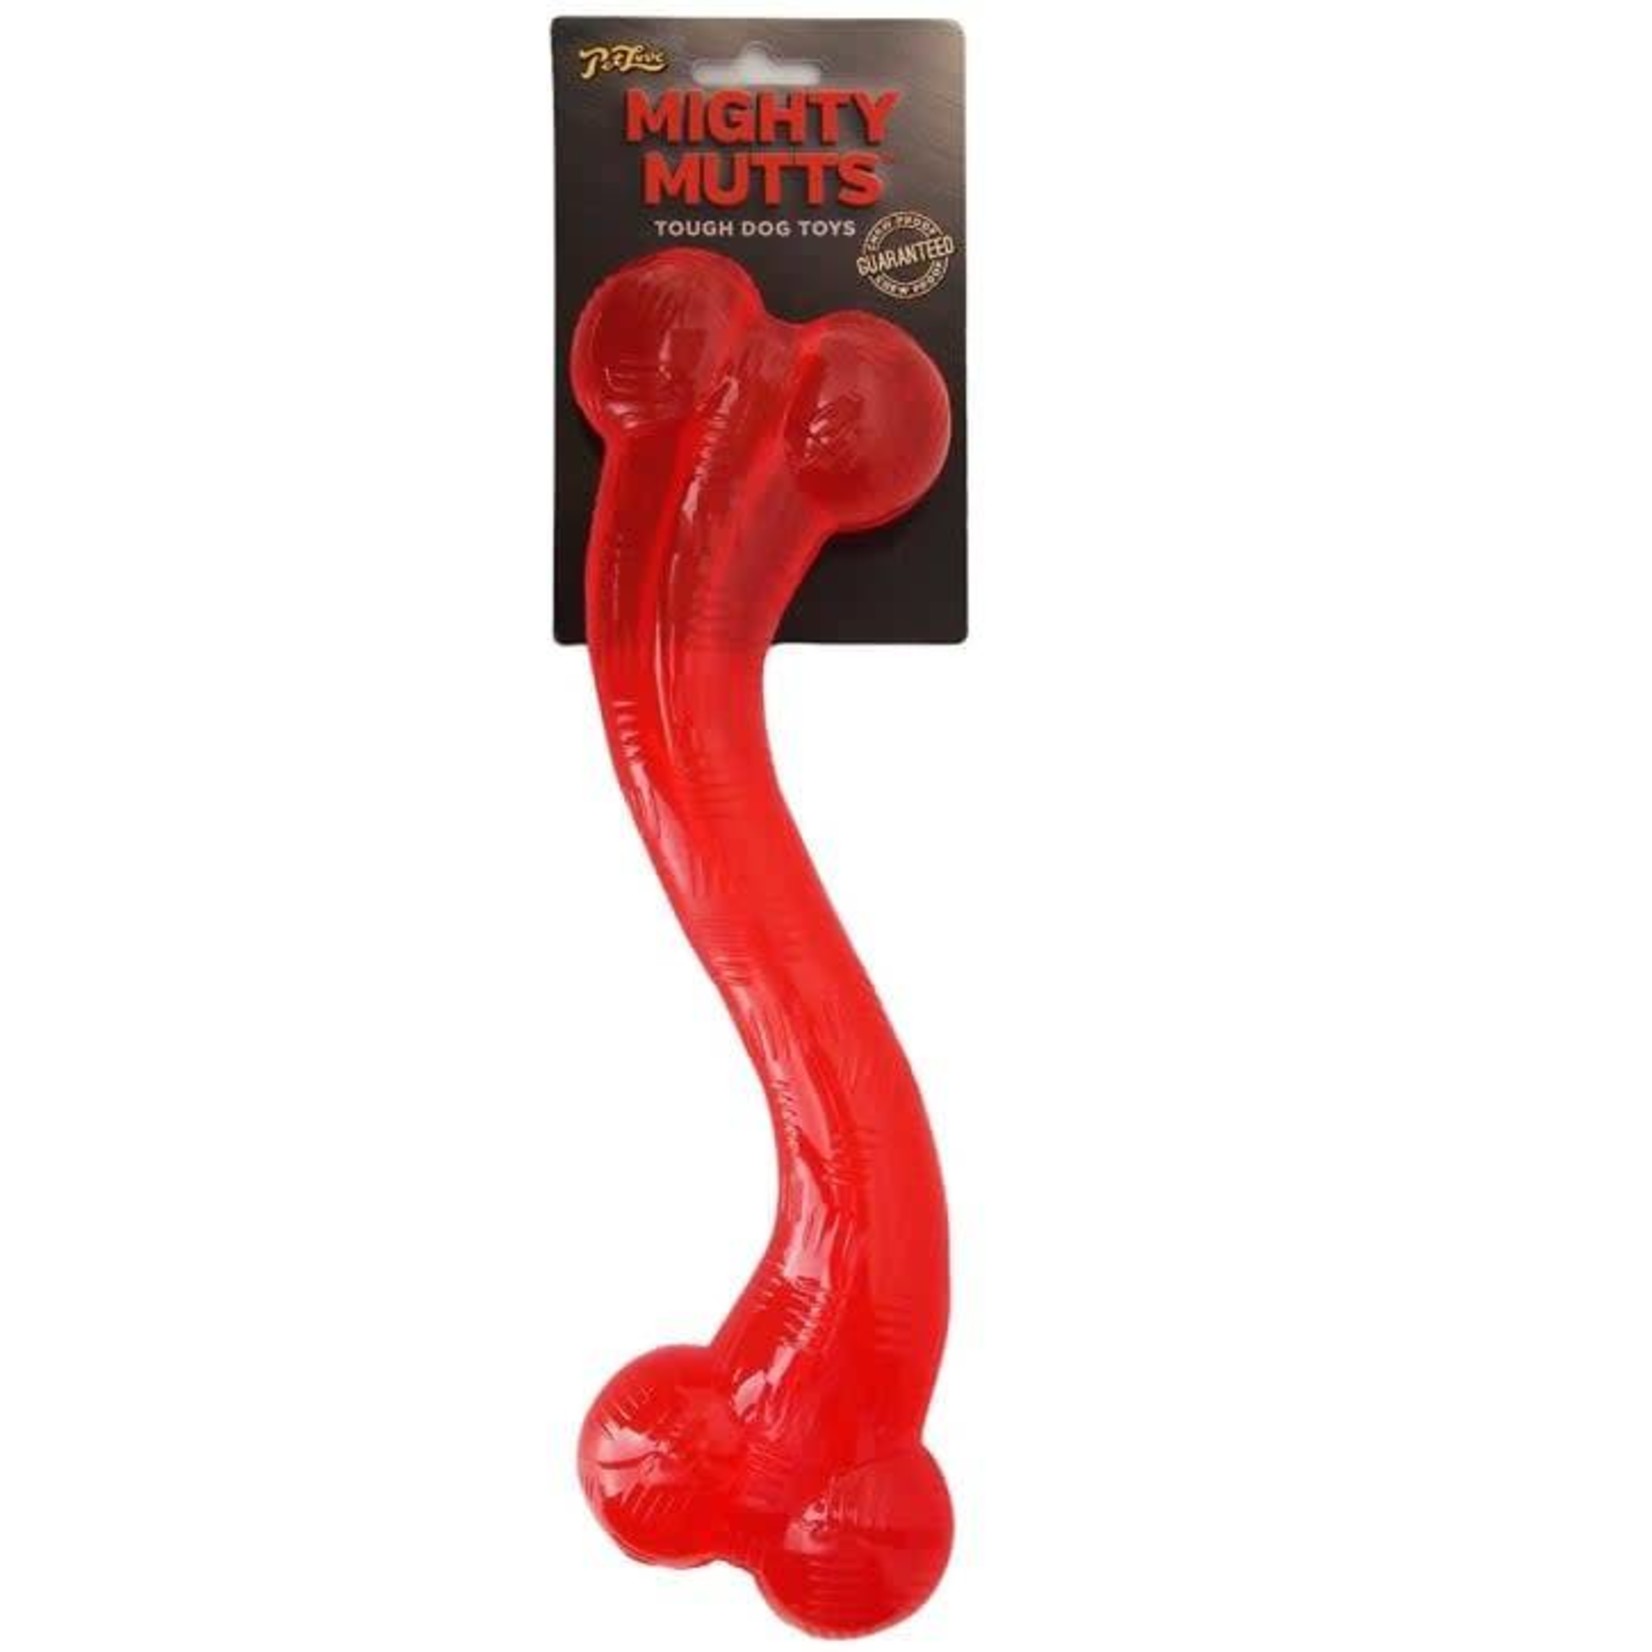 Mighty Mutts S-Bone Rubber Dog Toy